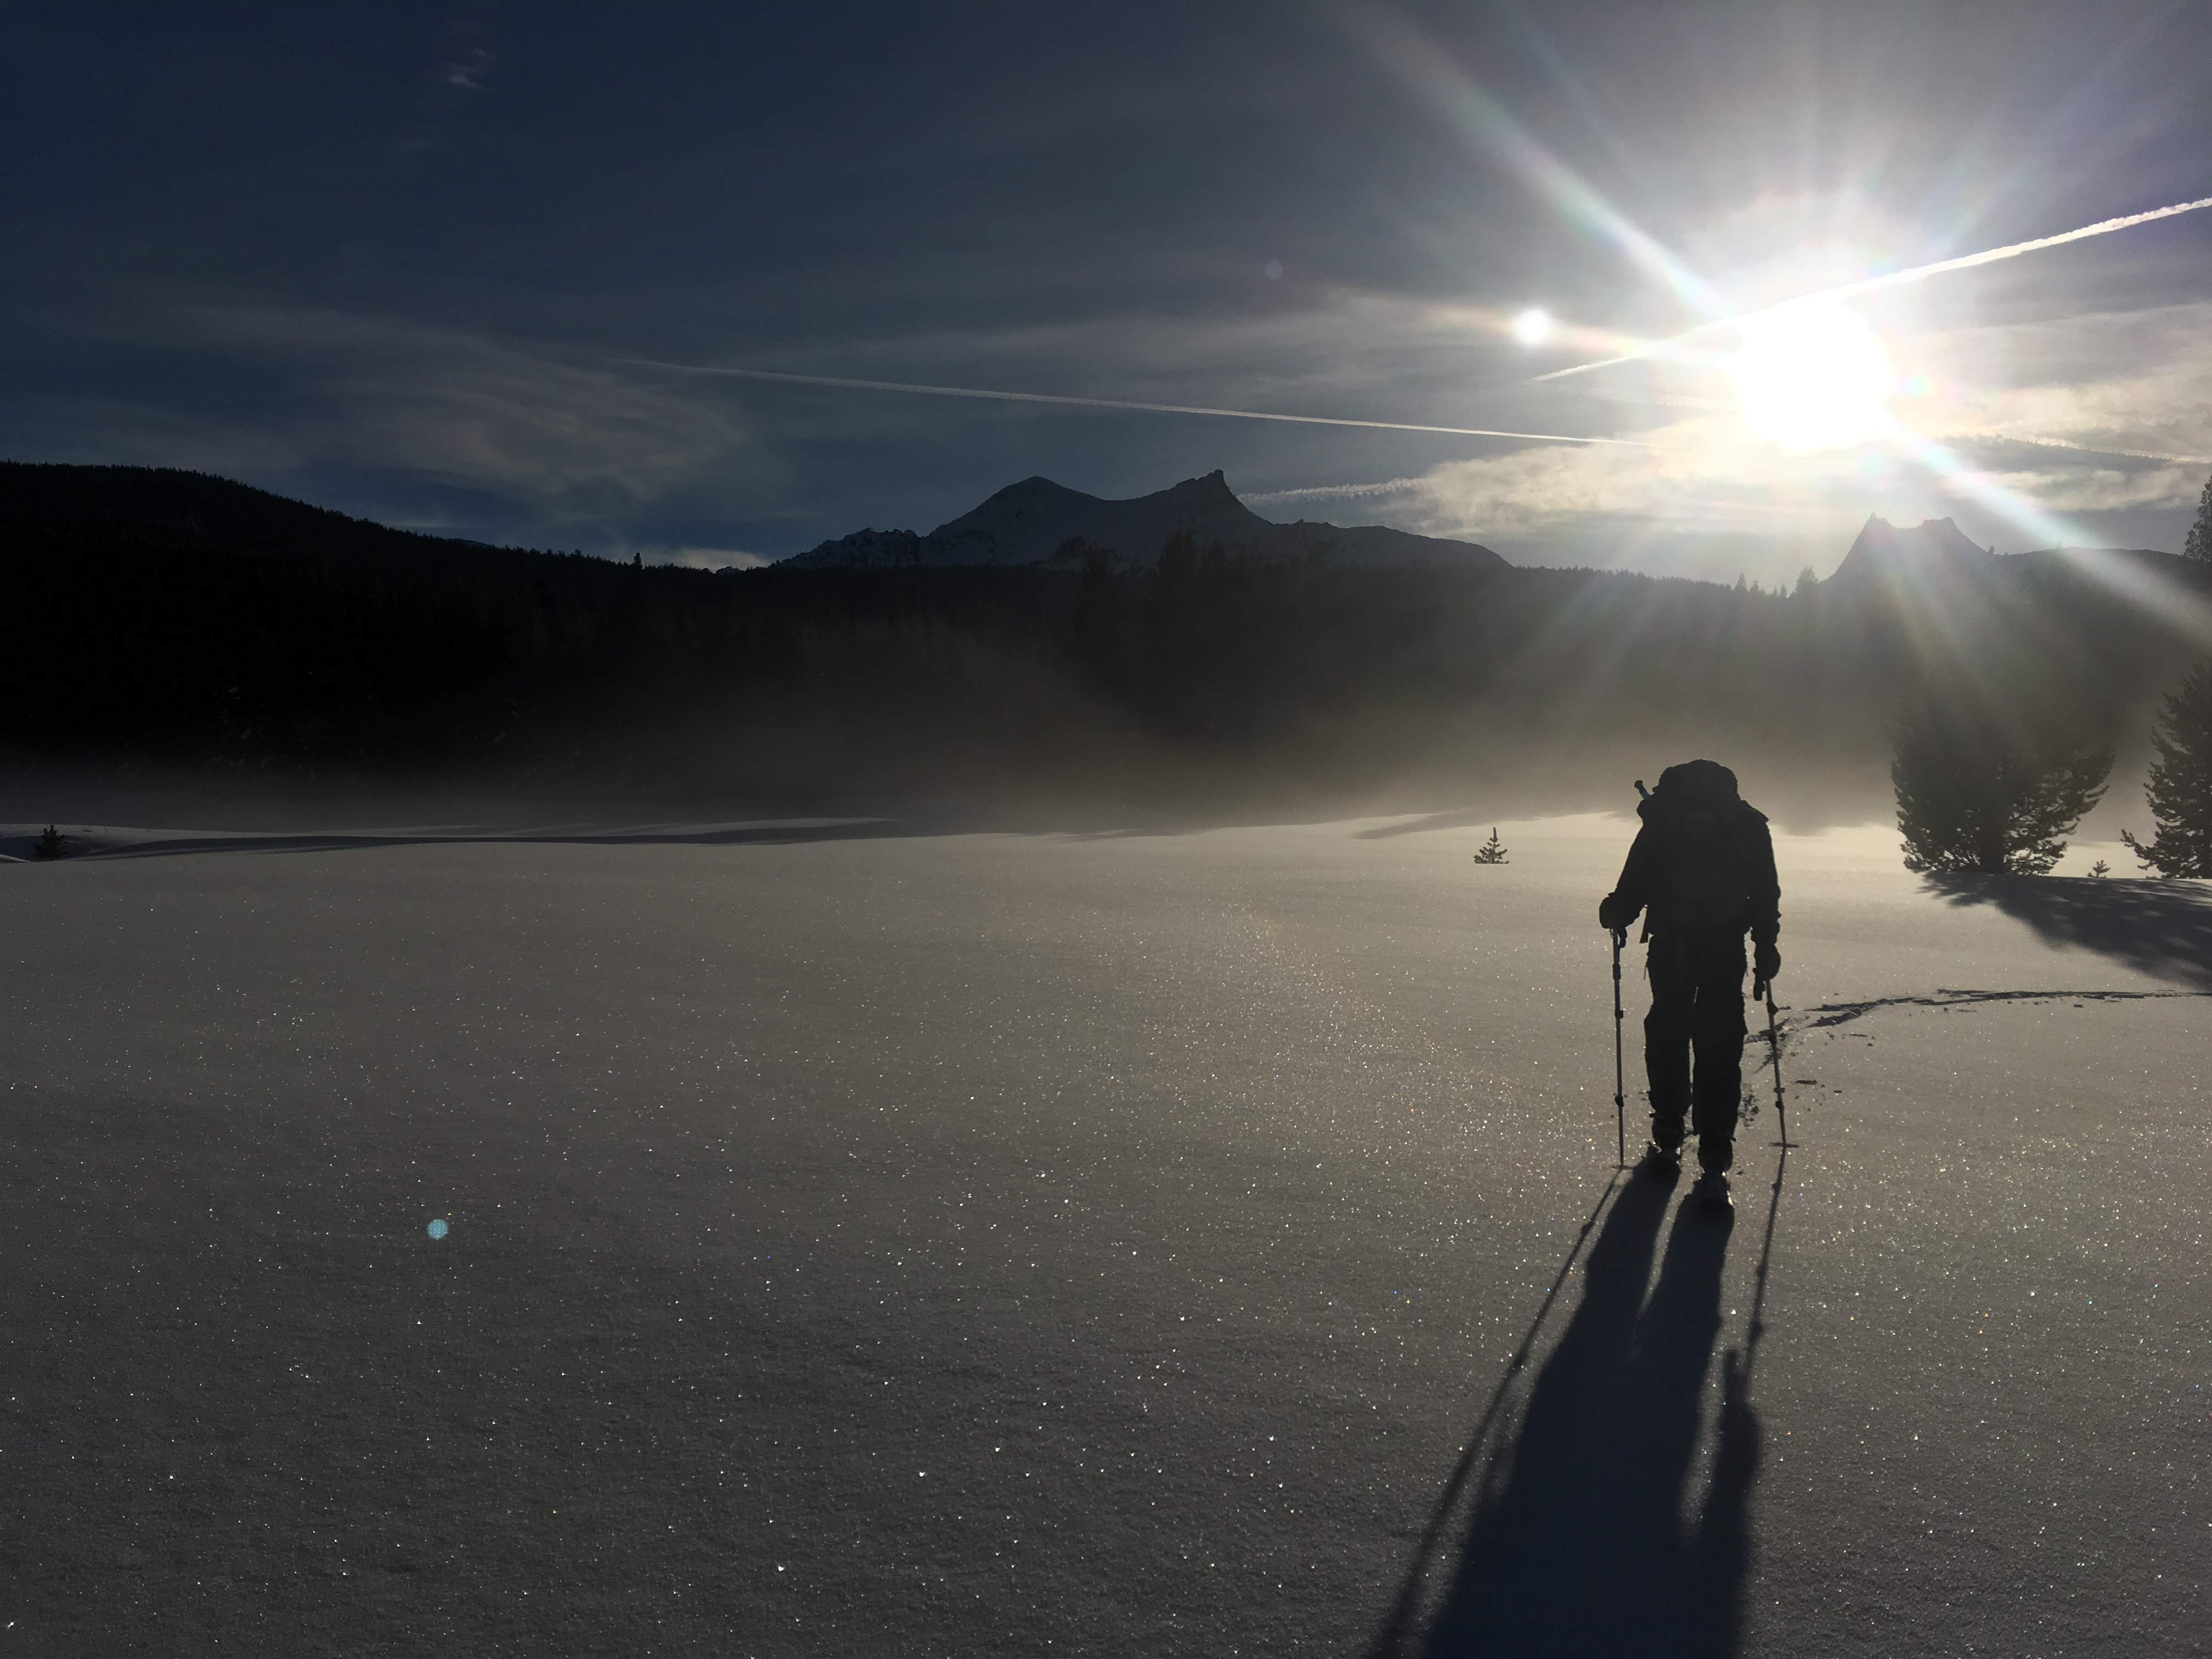 Single person on skis stands backlit by golden sun and shining snow